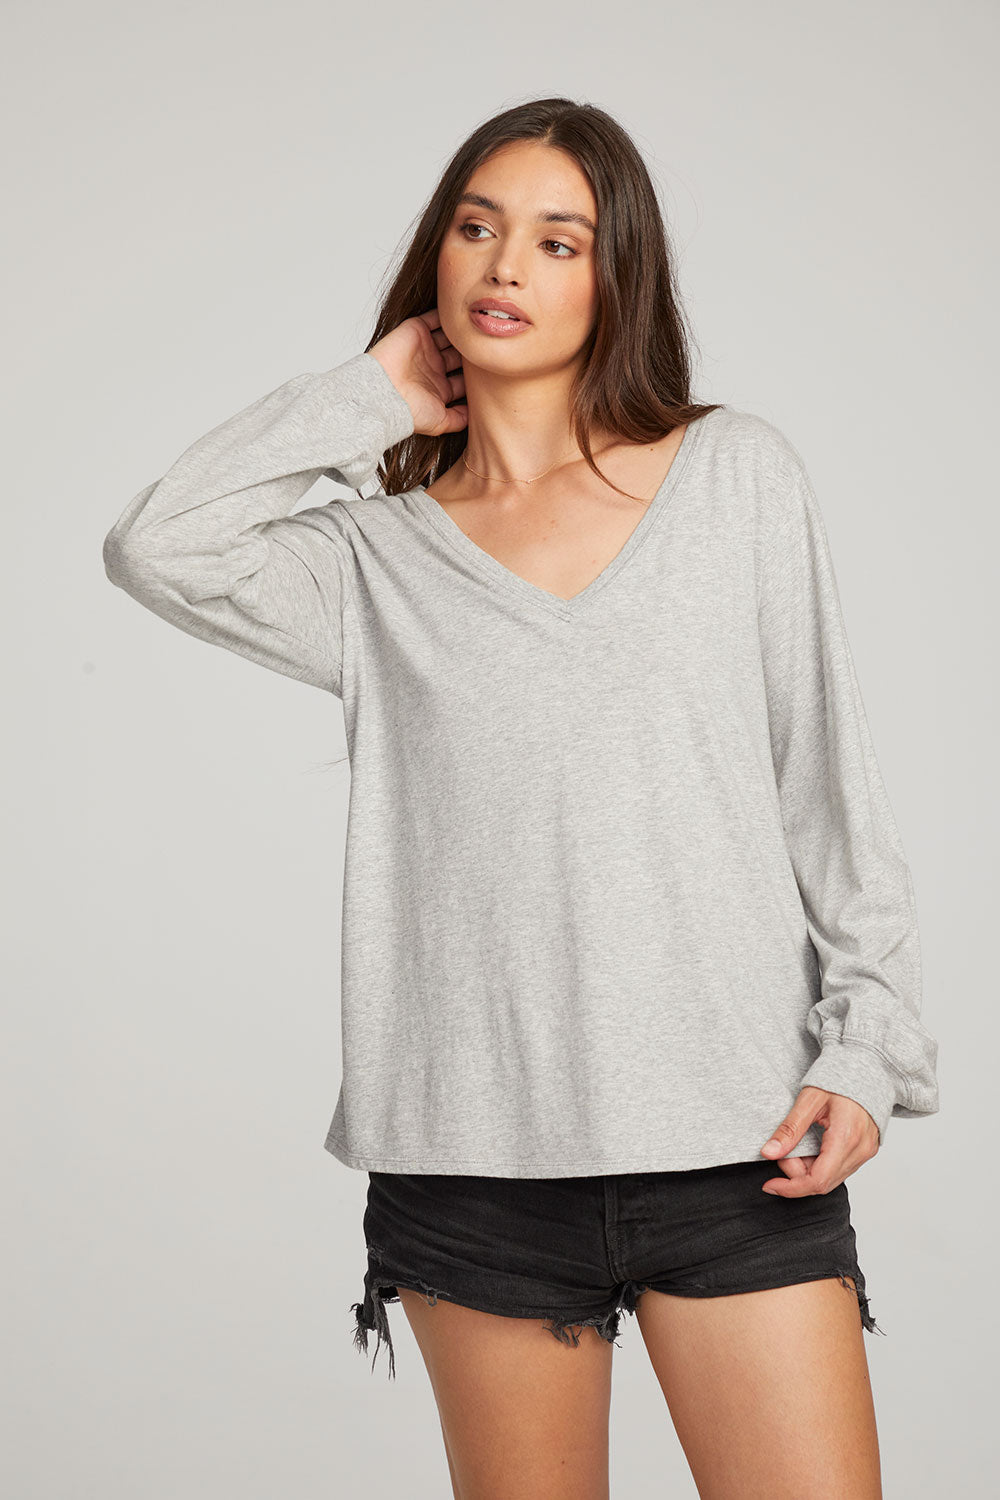 Chaser brand long sleeve ruched sides tee – Stylebox